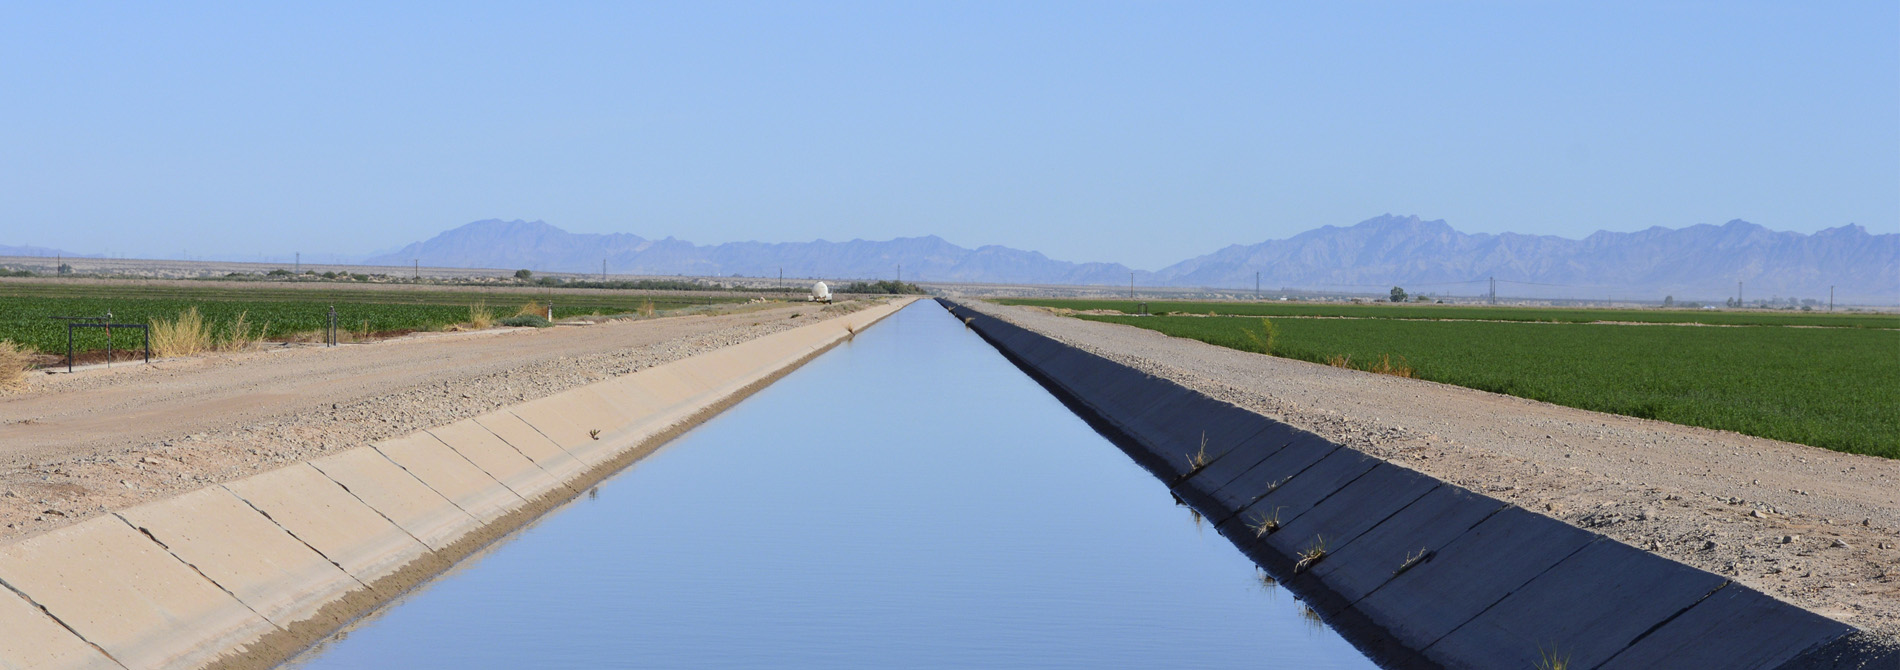 Large irrigation canal filled with water between two agricultural fields near Blythe, California.